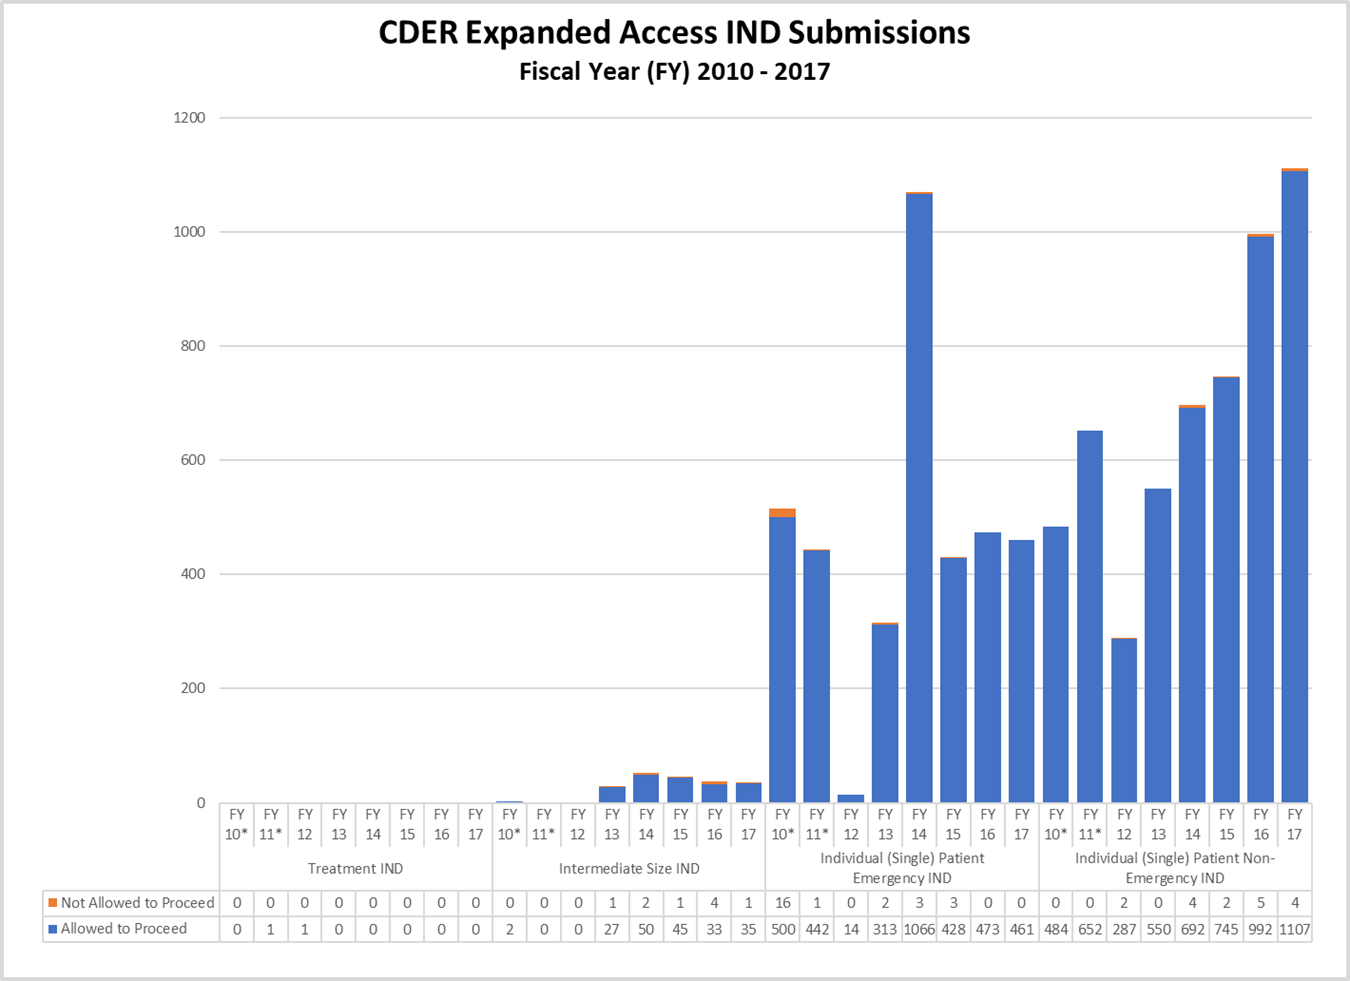 CDER Expanded Access IND Submissions Fiscal Year (FY) 2010 - 2017